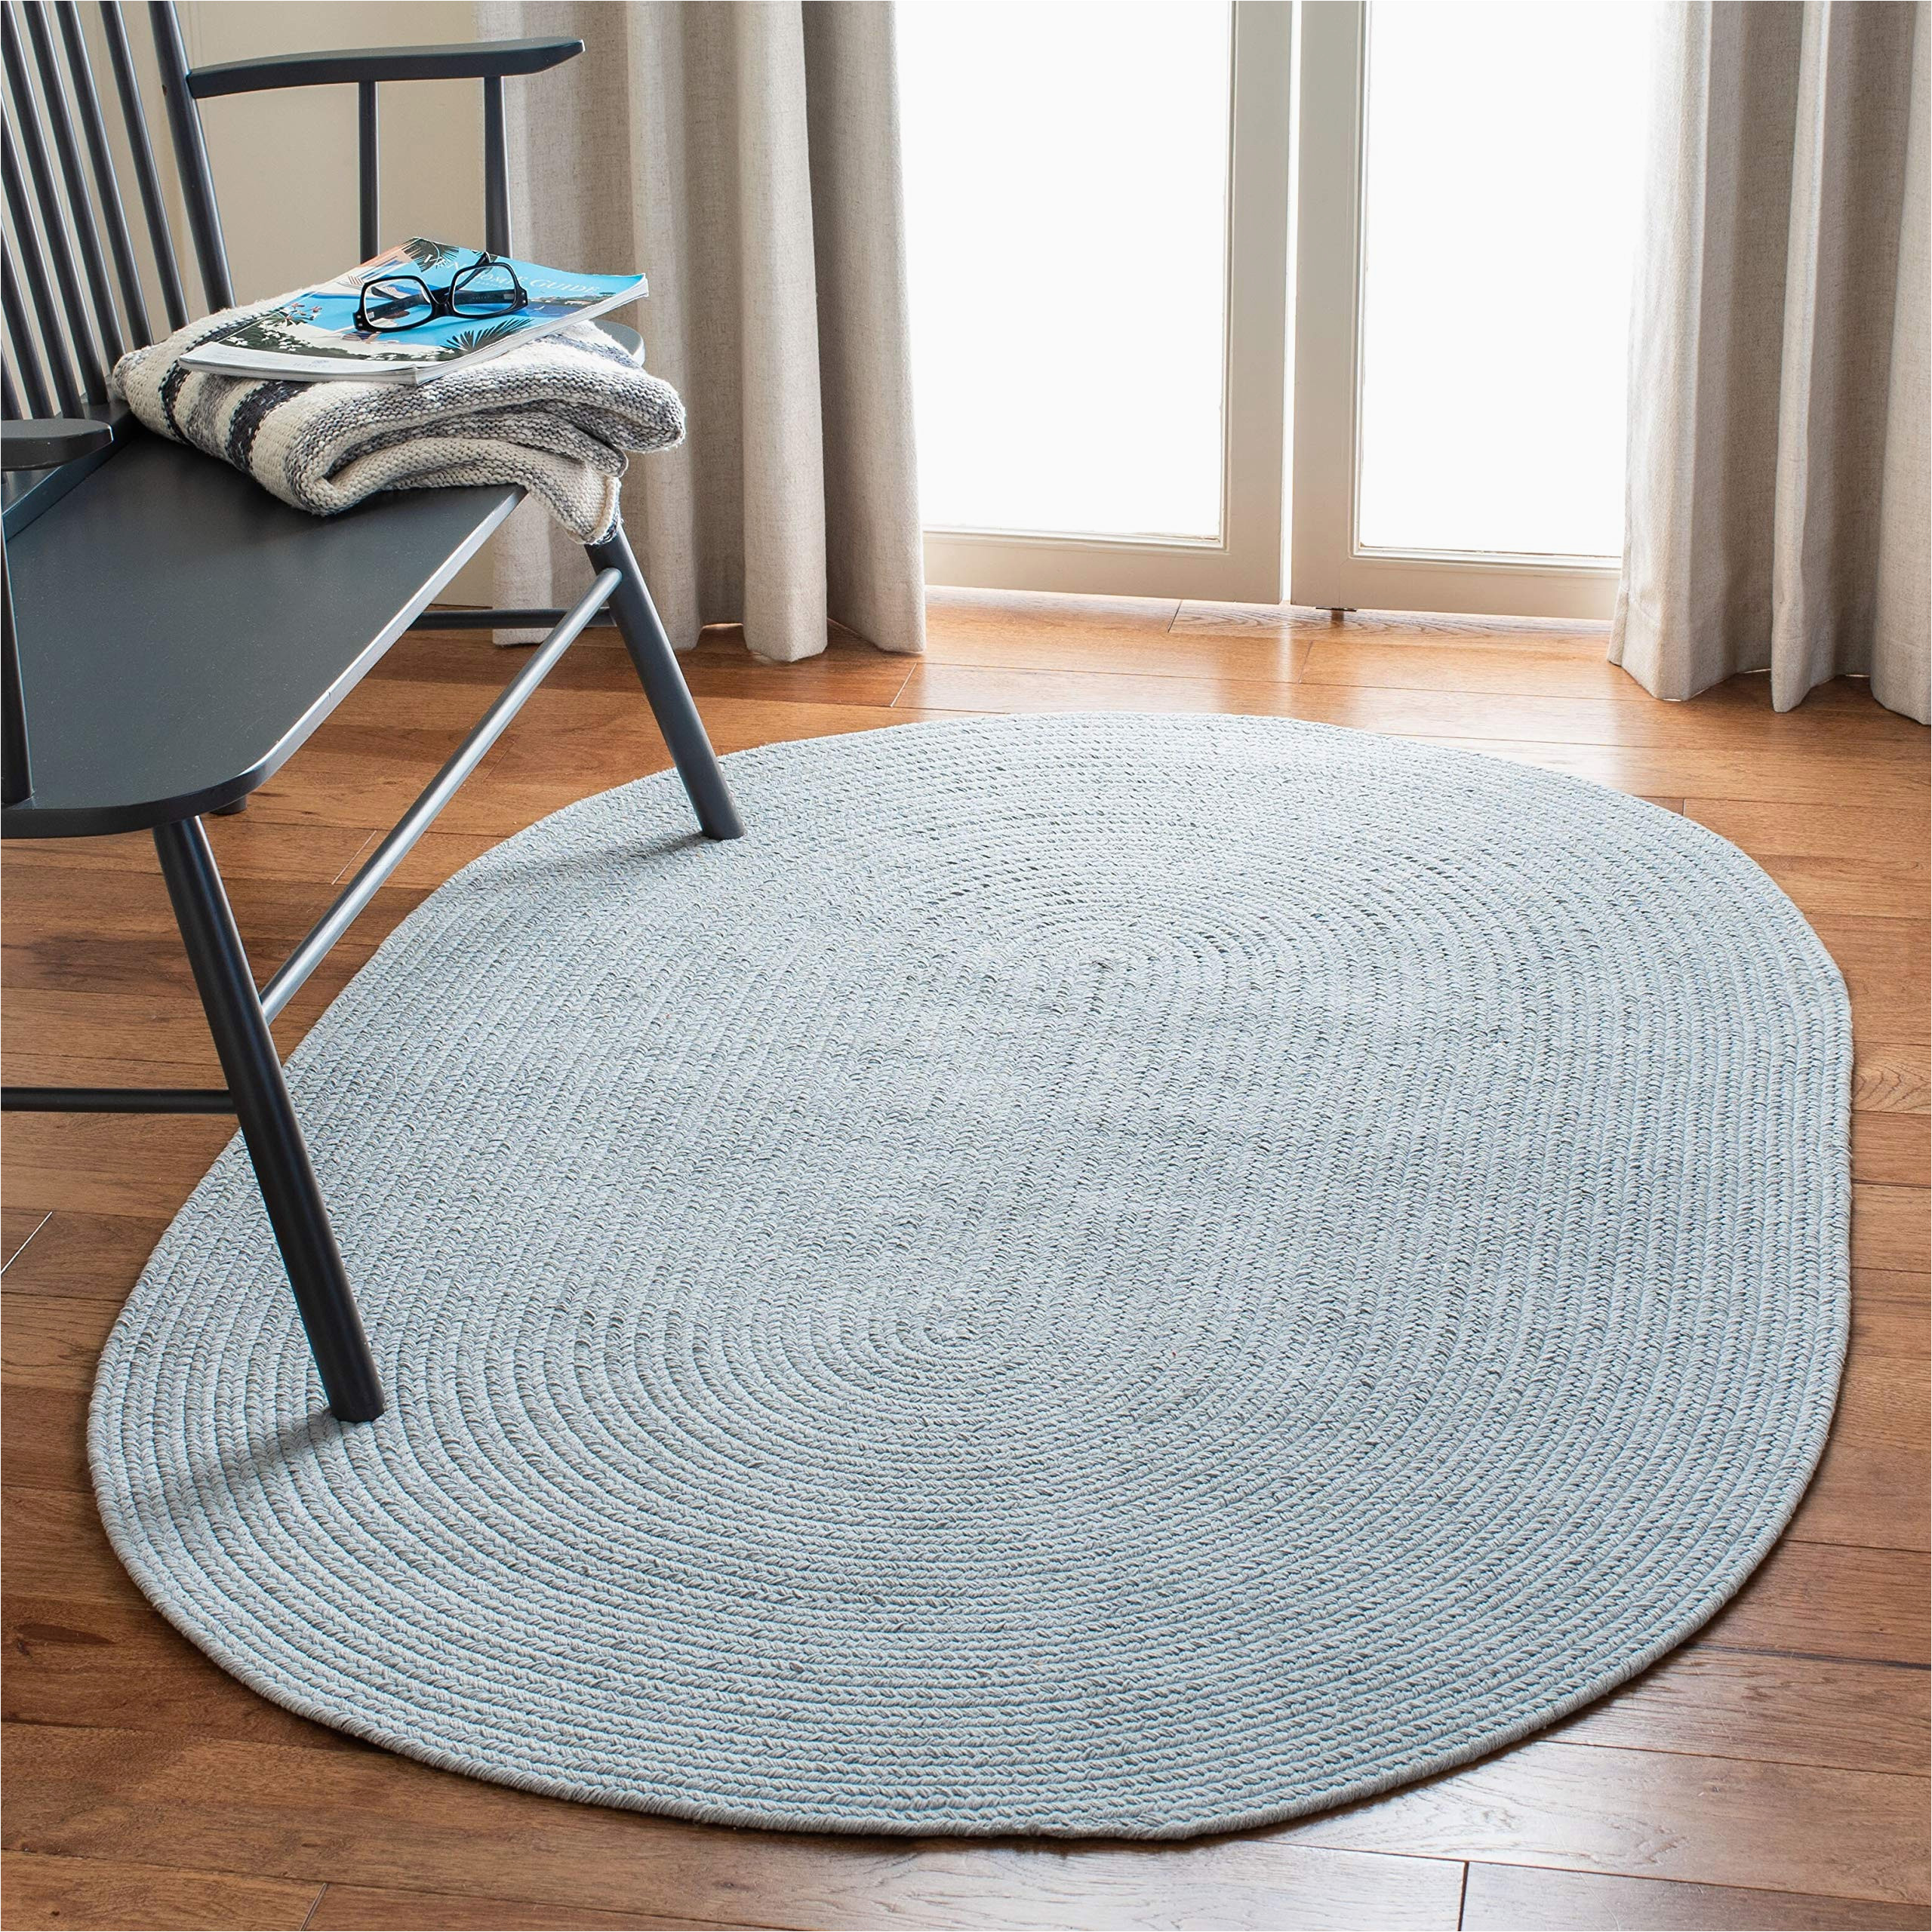 Oval area Rugs 9 X 12 Safavieh Braided Collection 9′ X 12′ Oval Light Blue Brd176a Handmade Country Cottage Reversible Cotton area Rug